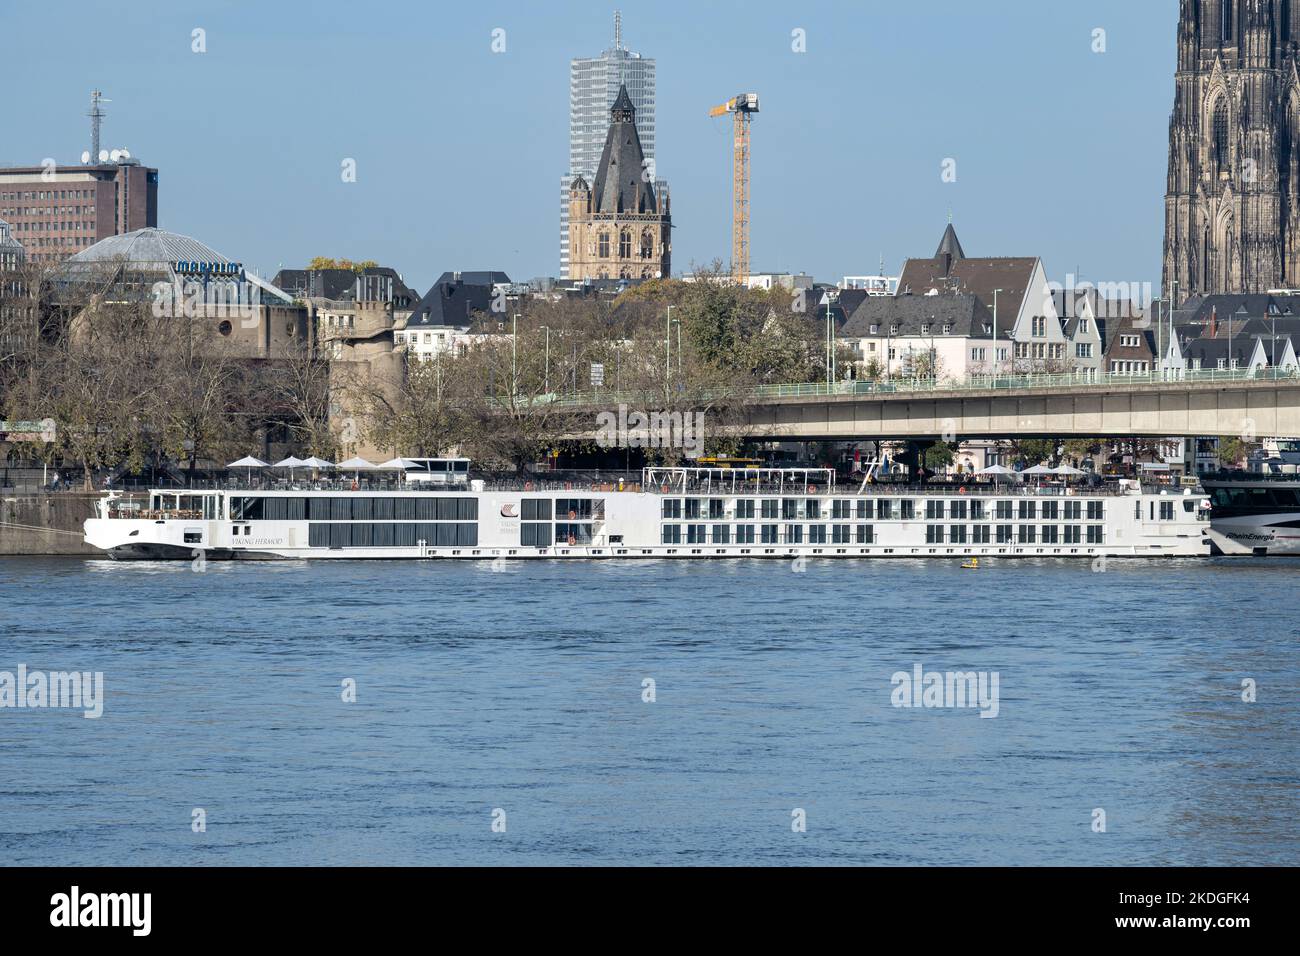 river cruise ship VIKING HERMOND in Cologne, Germany Stock Photo